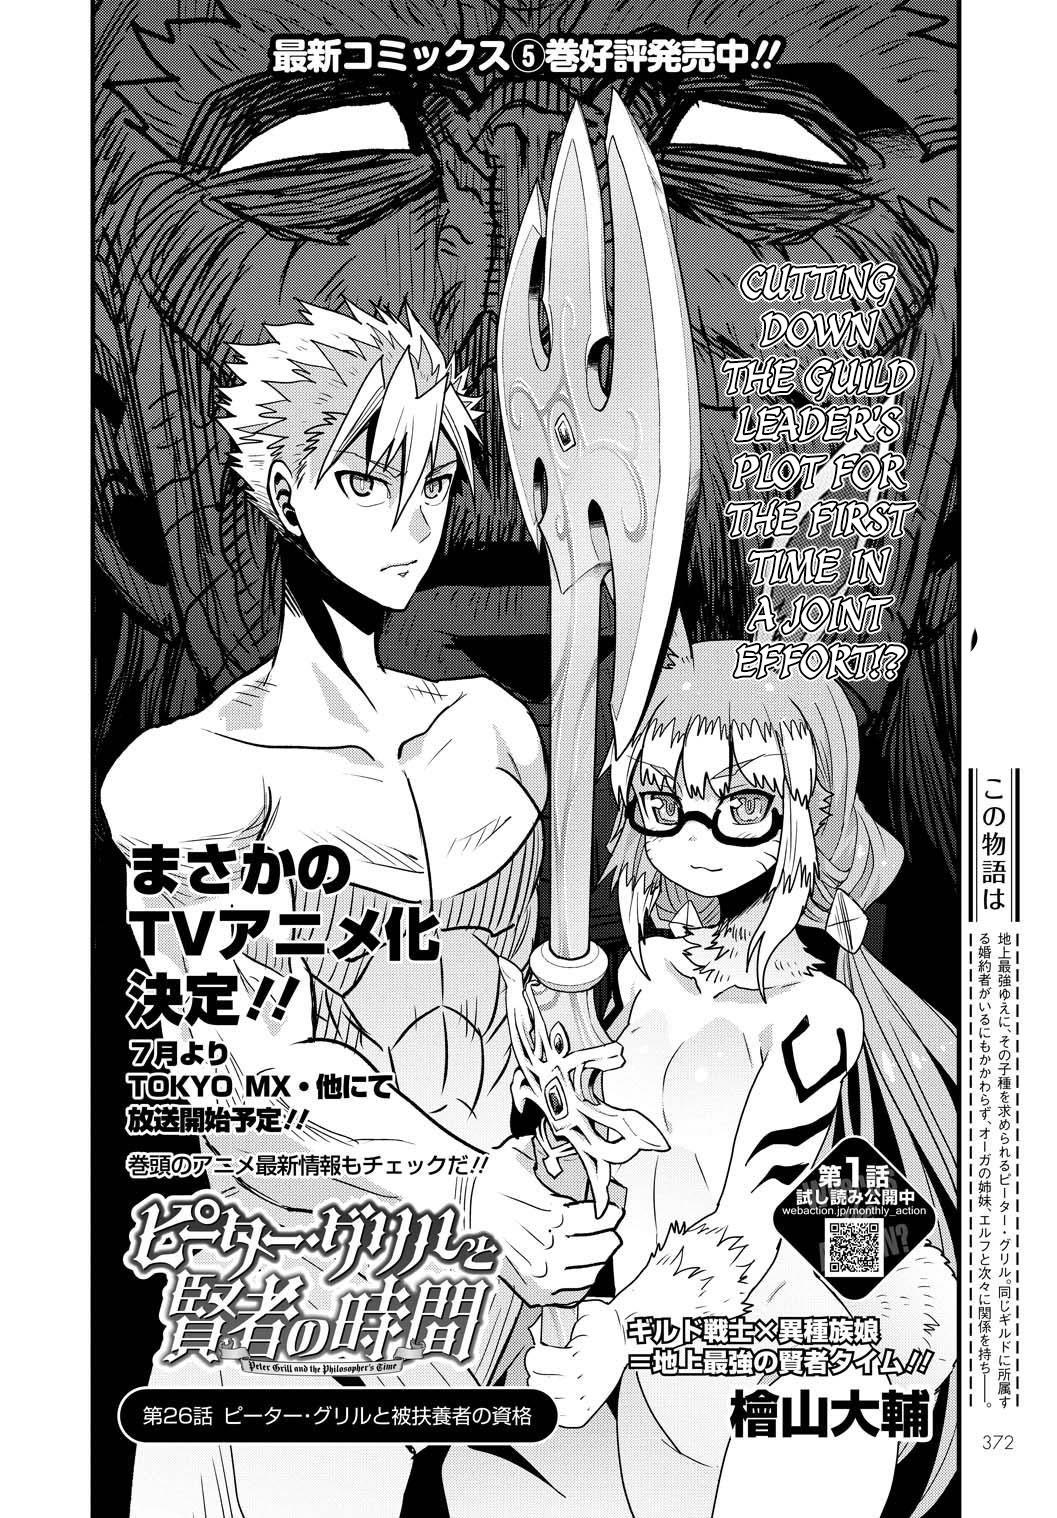 Read Peter Grill To Kenja No Jikan Chapter 38: Finally, The Time Has  Come!! - Manganelo